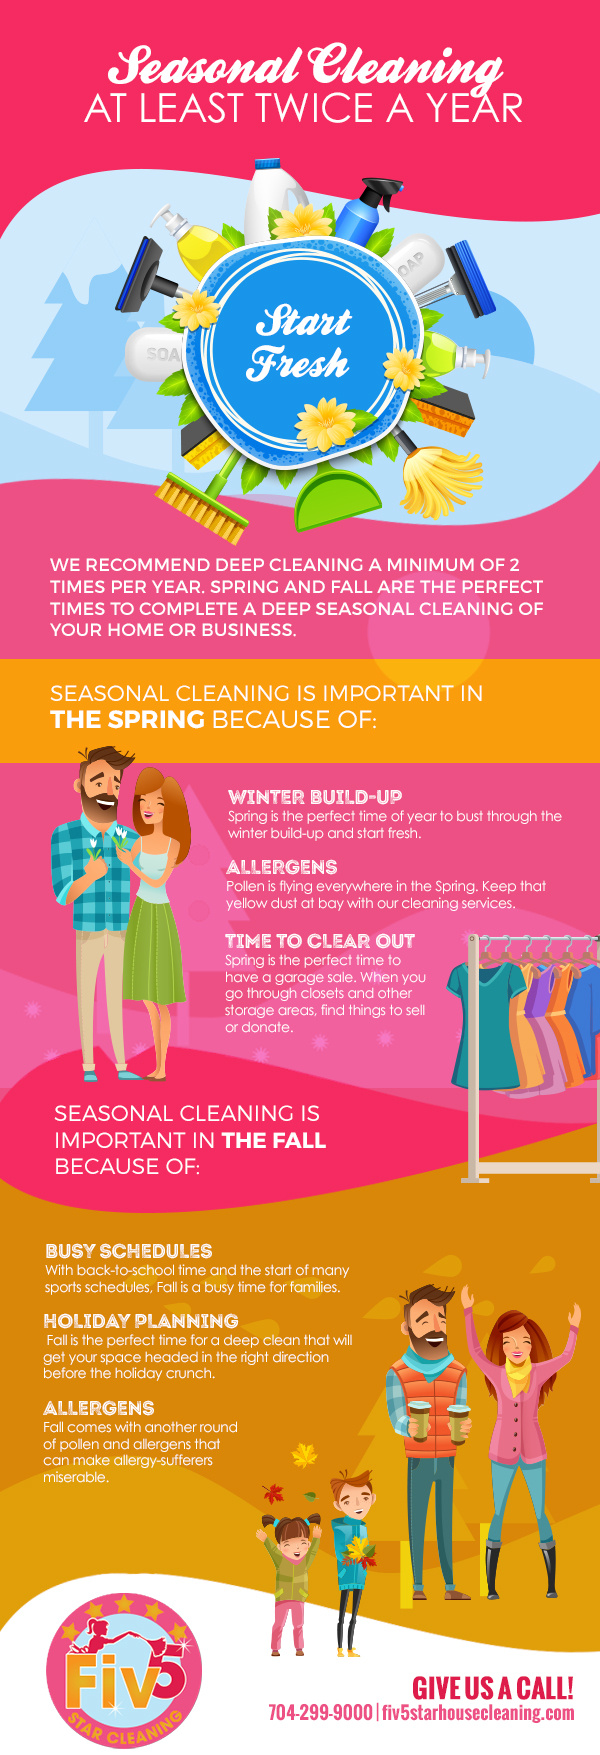  Start Fresh with Seasonal Cleaning At Least Twice a Year